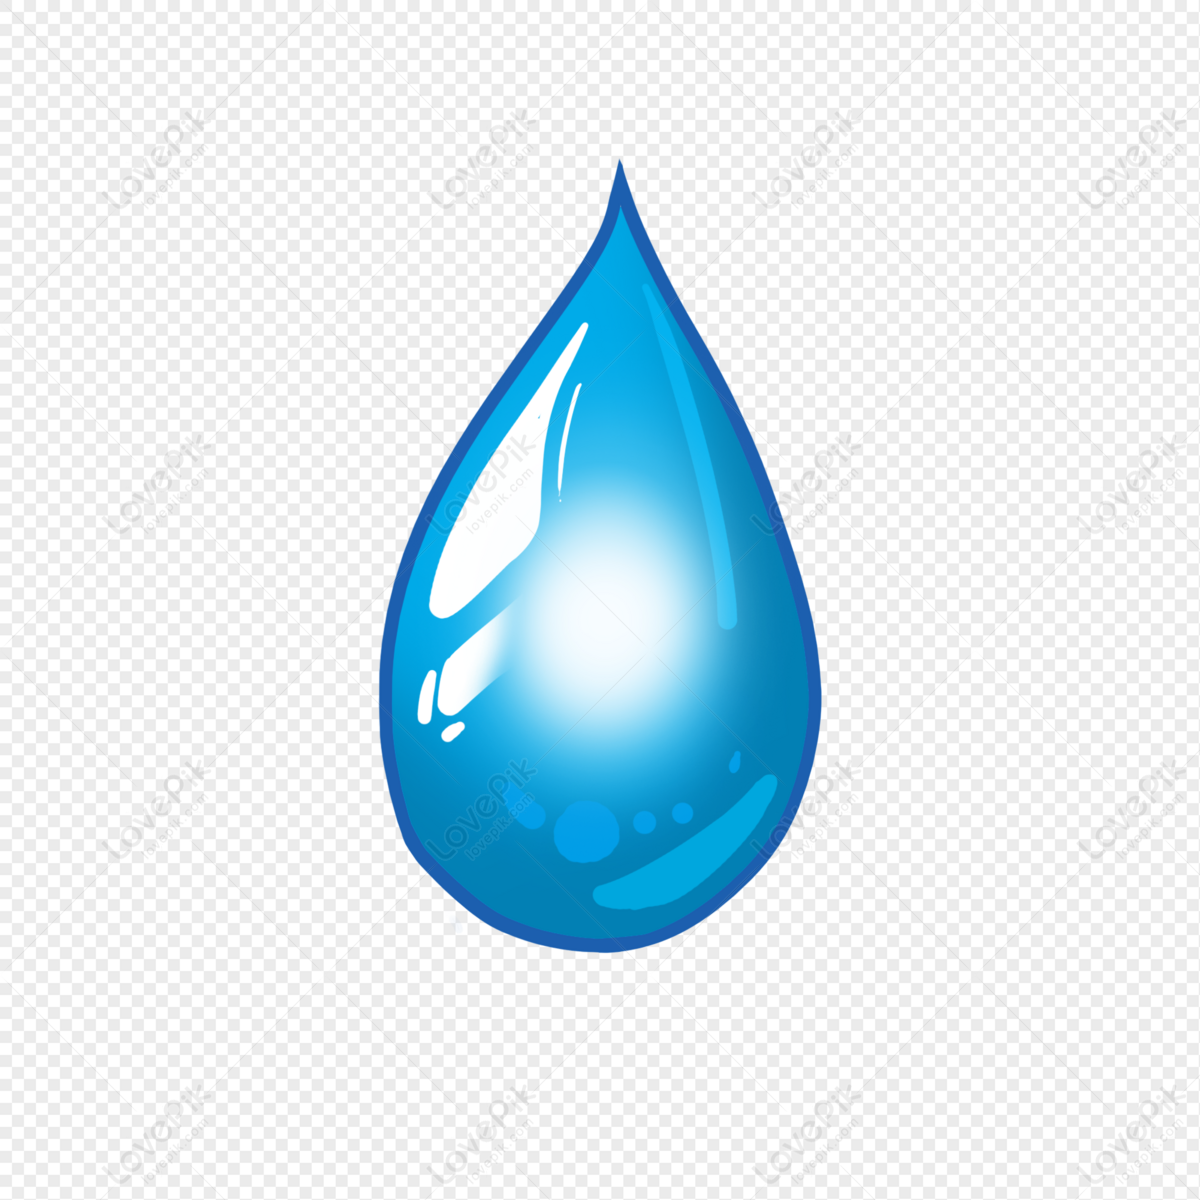 Realistic Water Drop Cartoon Patterns PNG Image And Clipart Image For Free  Download - Lovepik | 401114088